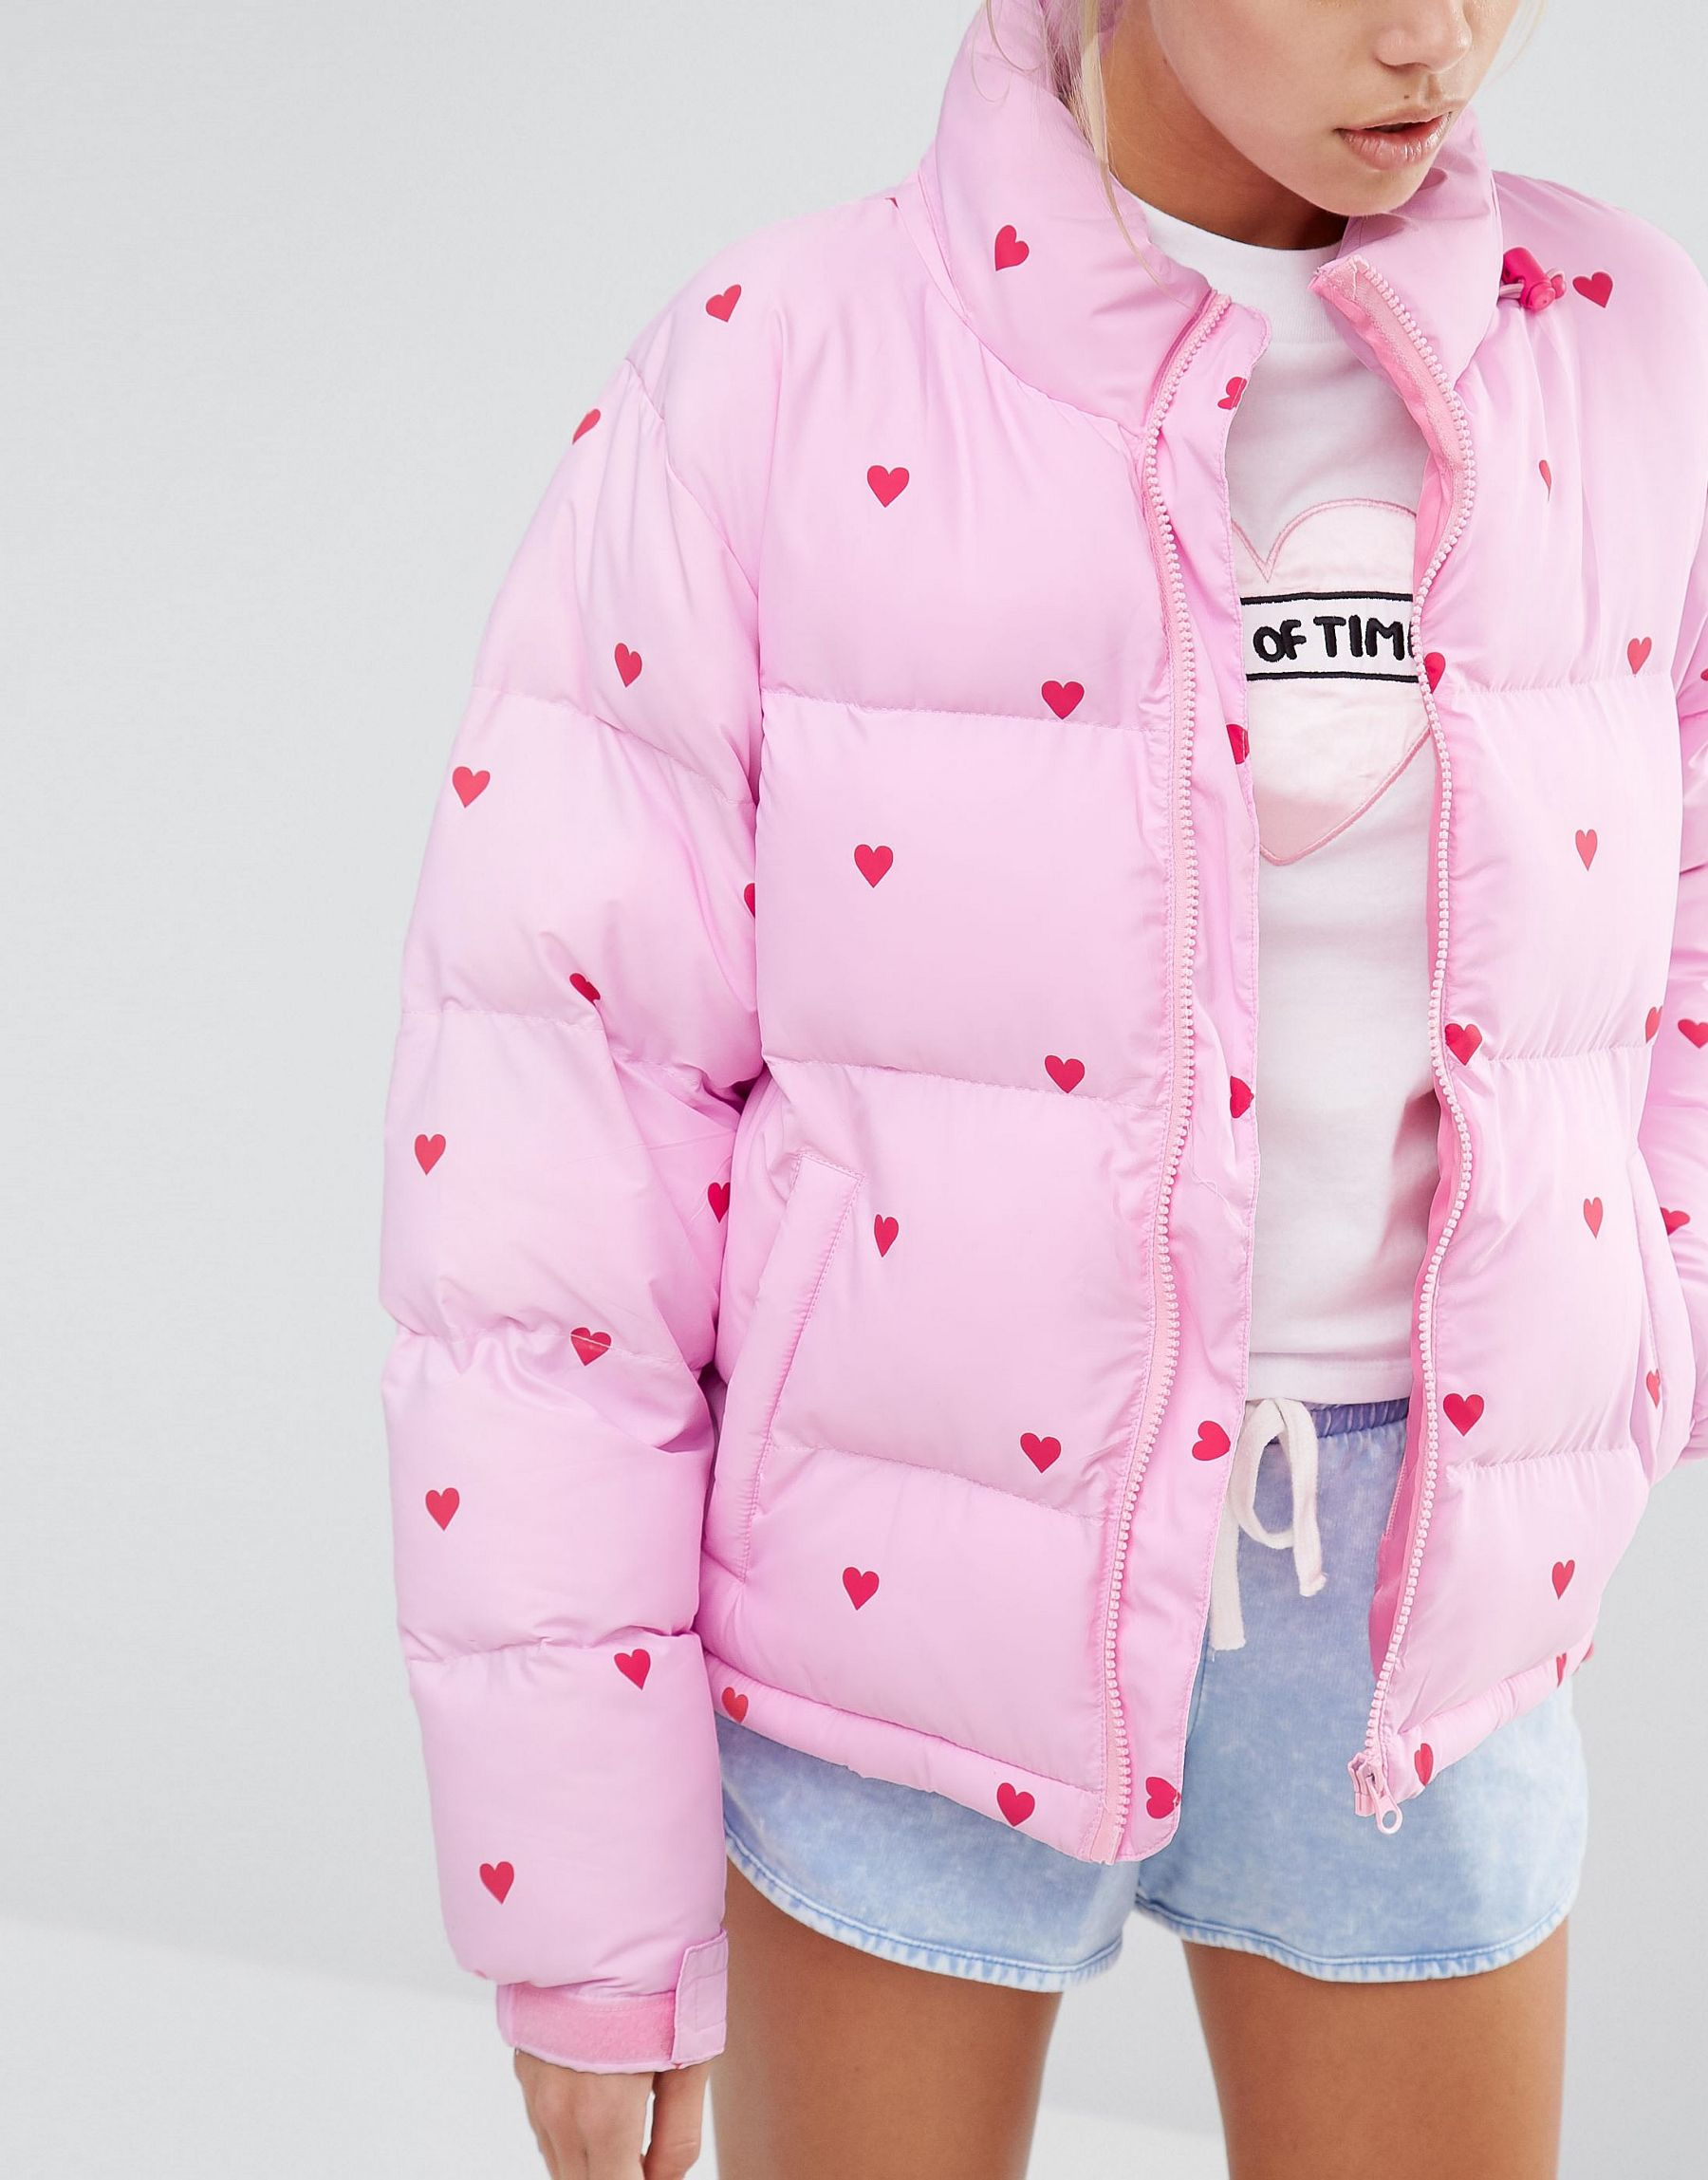 LV coat Down puffer jacket reversible women clothes  Cutie clothes,  Streetwear fashion women, Cute lazy outfits